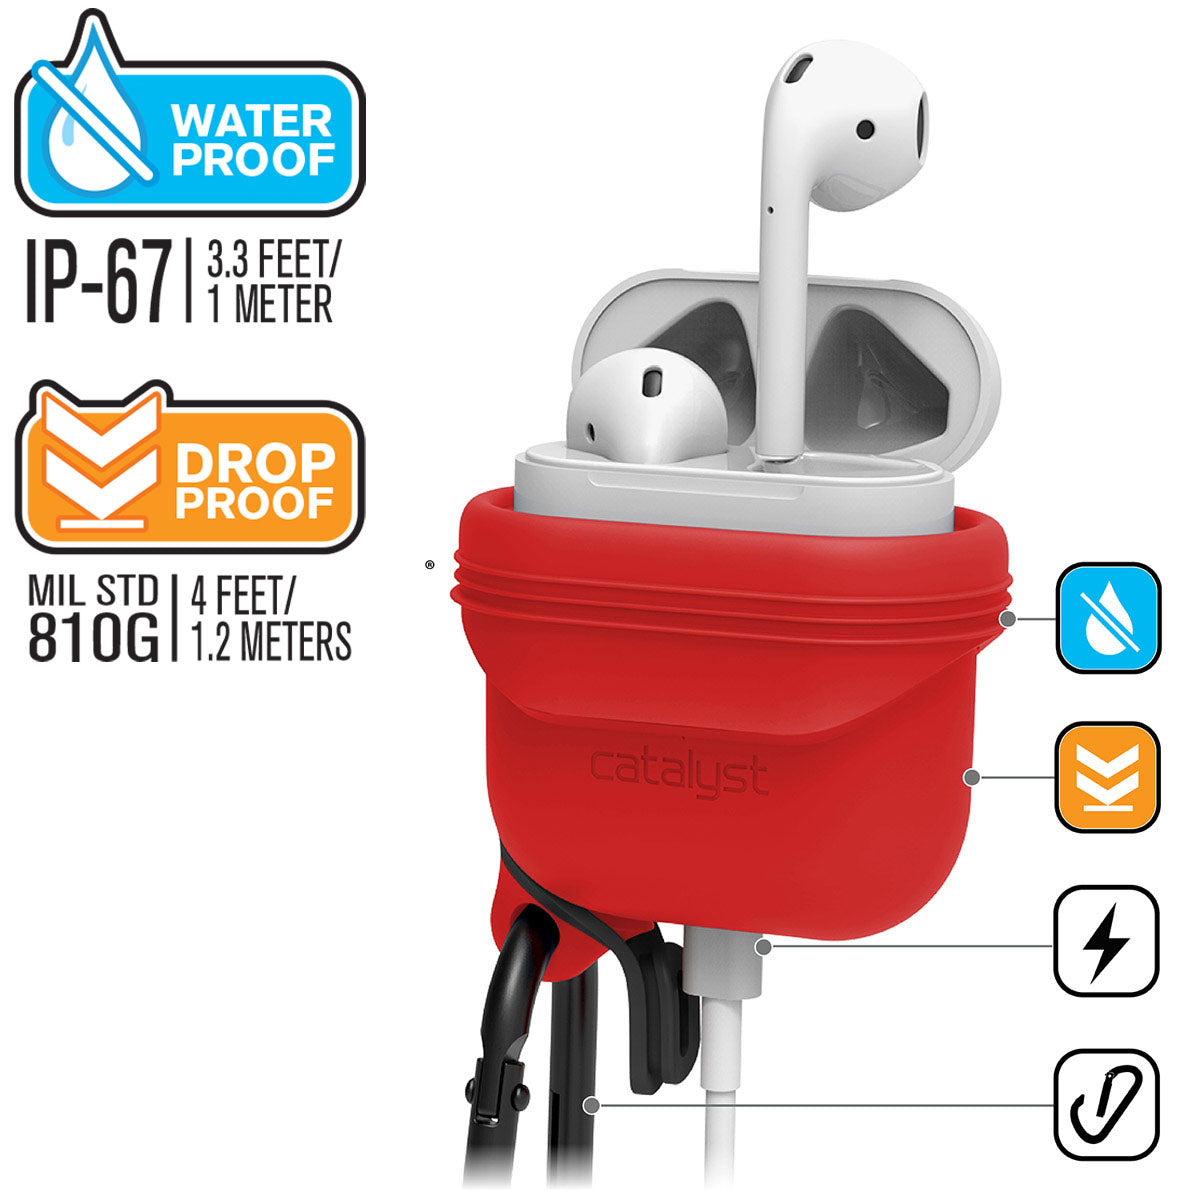 CATAPDRED | Catalyst airpods gen2/1 waterproof case + carabiner showing the case drop proof and water proof features in flame red text reads water proof IP-67 3.3 FEET/1 METER DROP PROOF MIL STD 810G 1.2 METERS